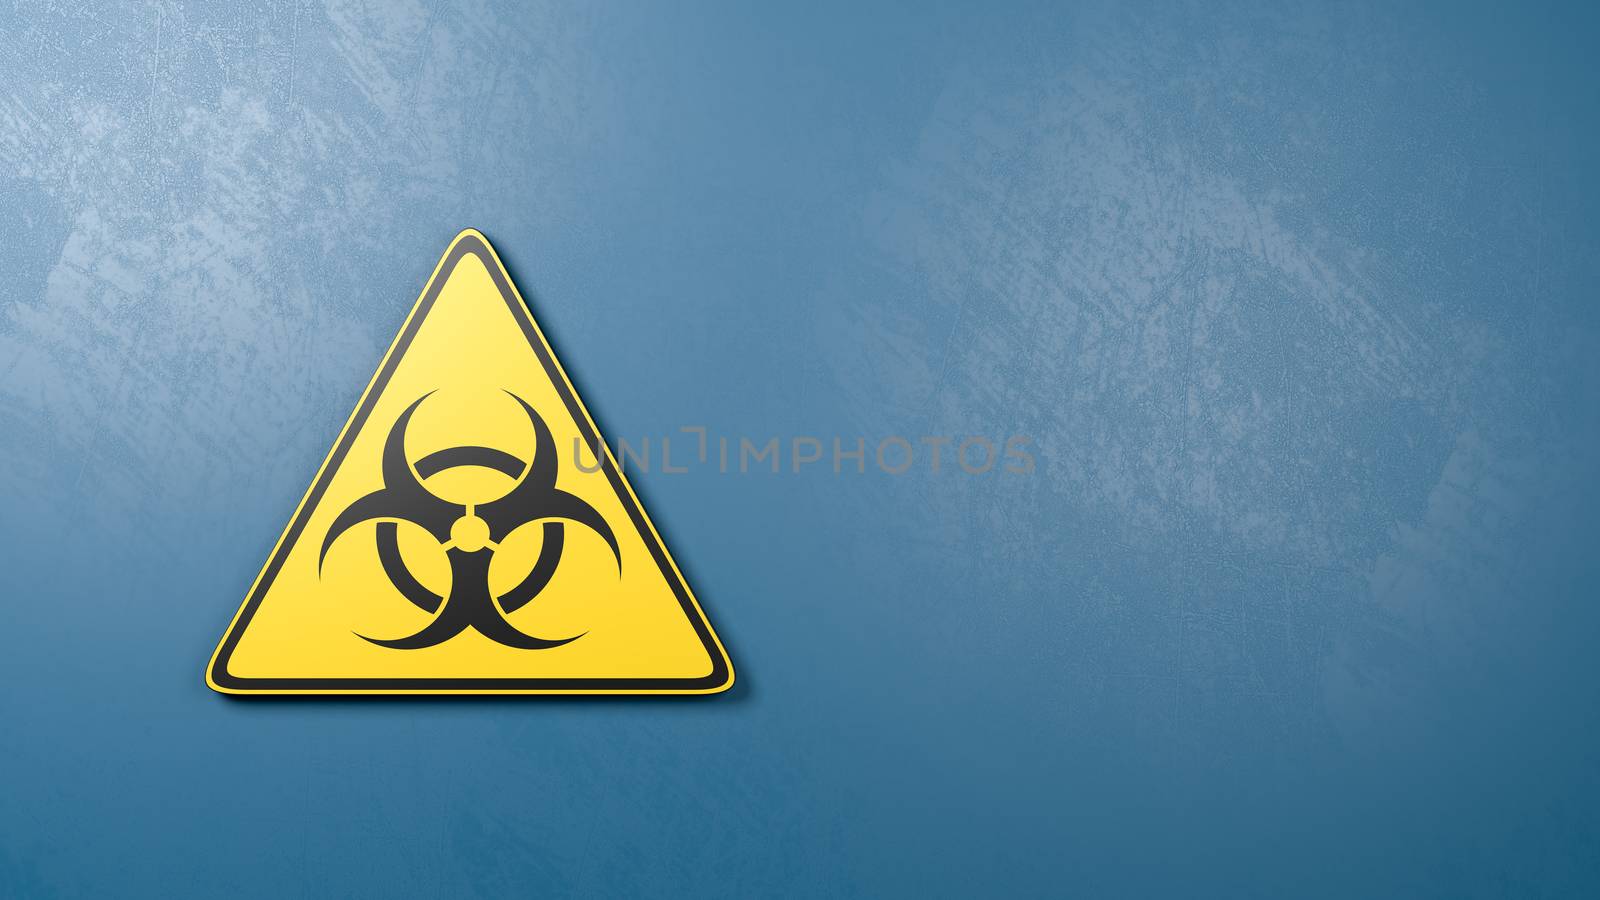 Black and Yellow Pandemic Symbol Warning Triangle Against a Blue Plastered Wall with Copy Space 3D Render Illustration